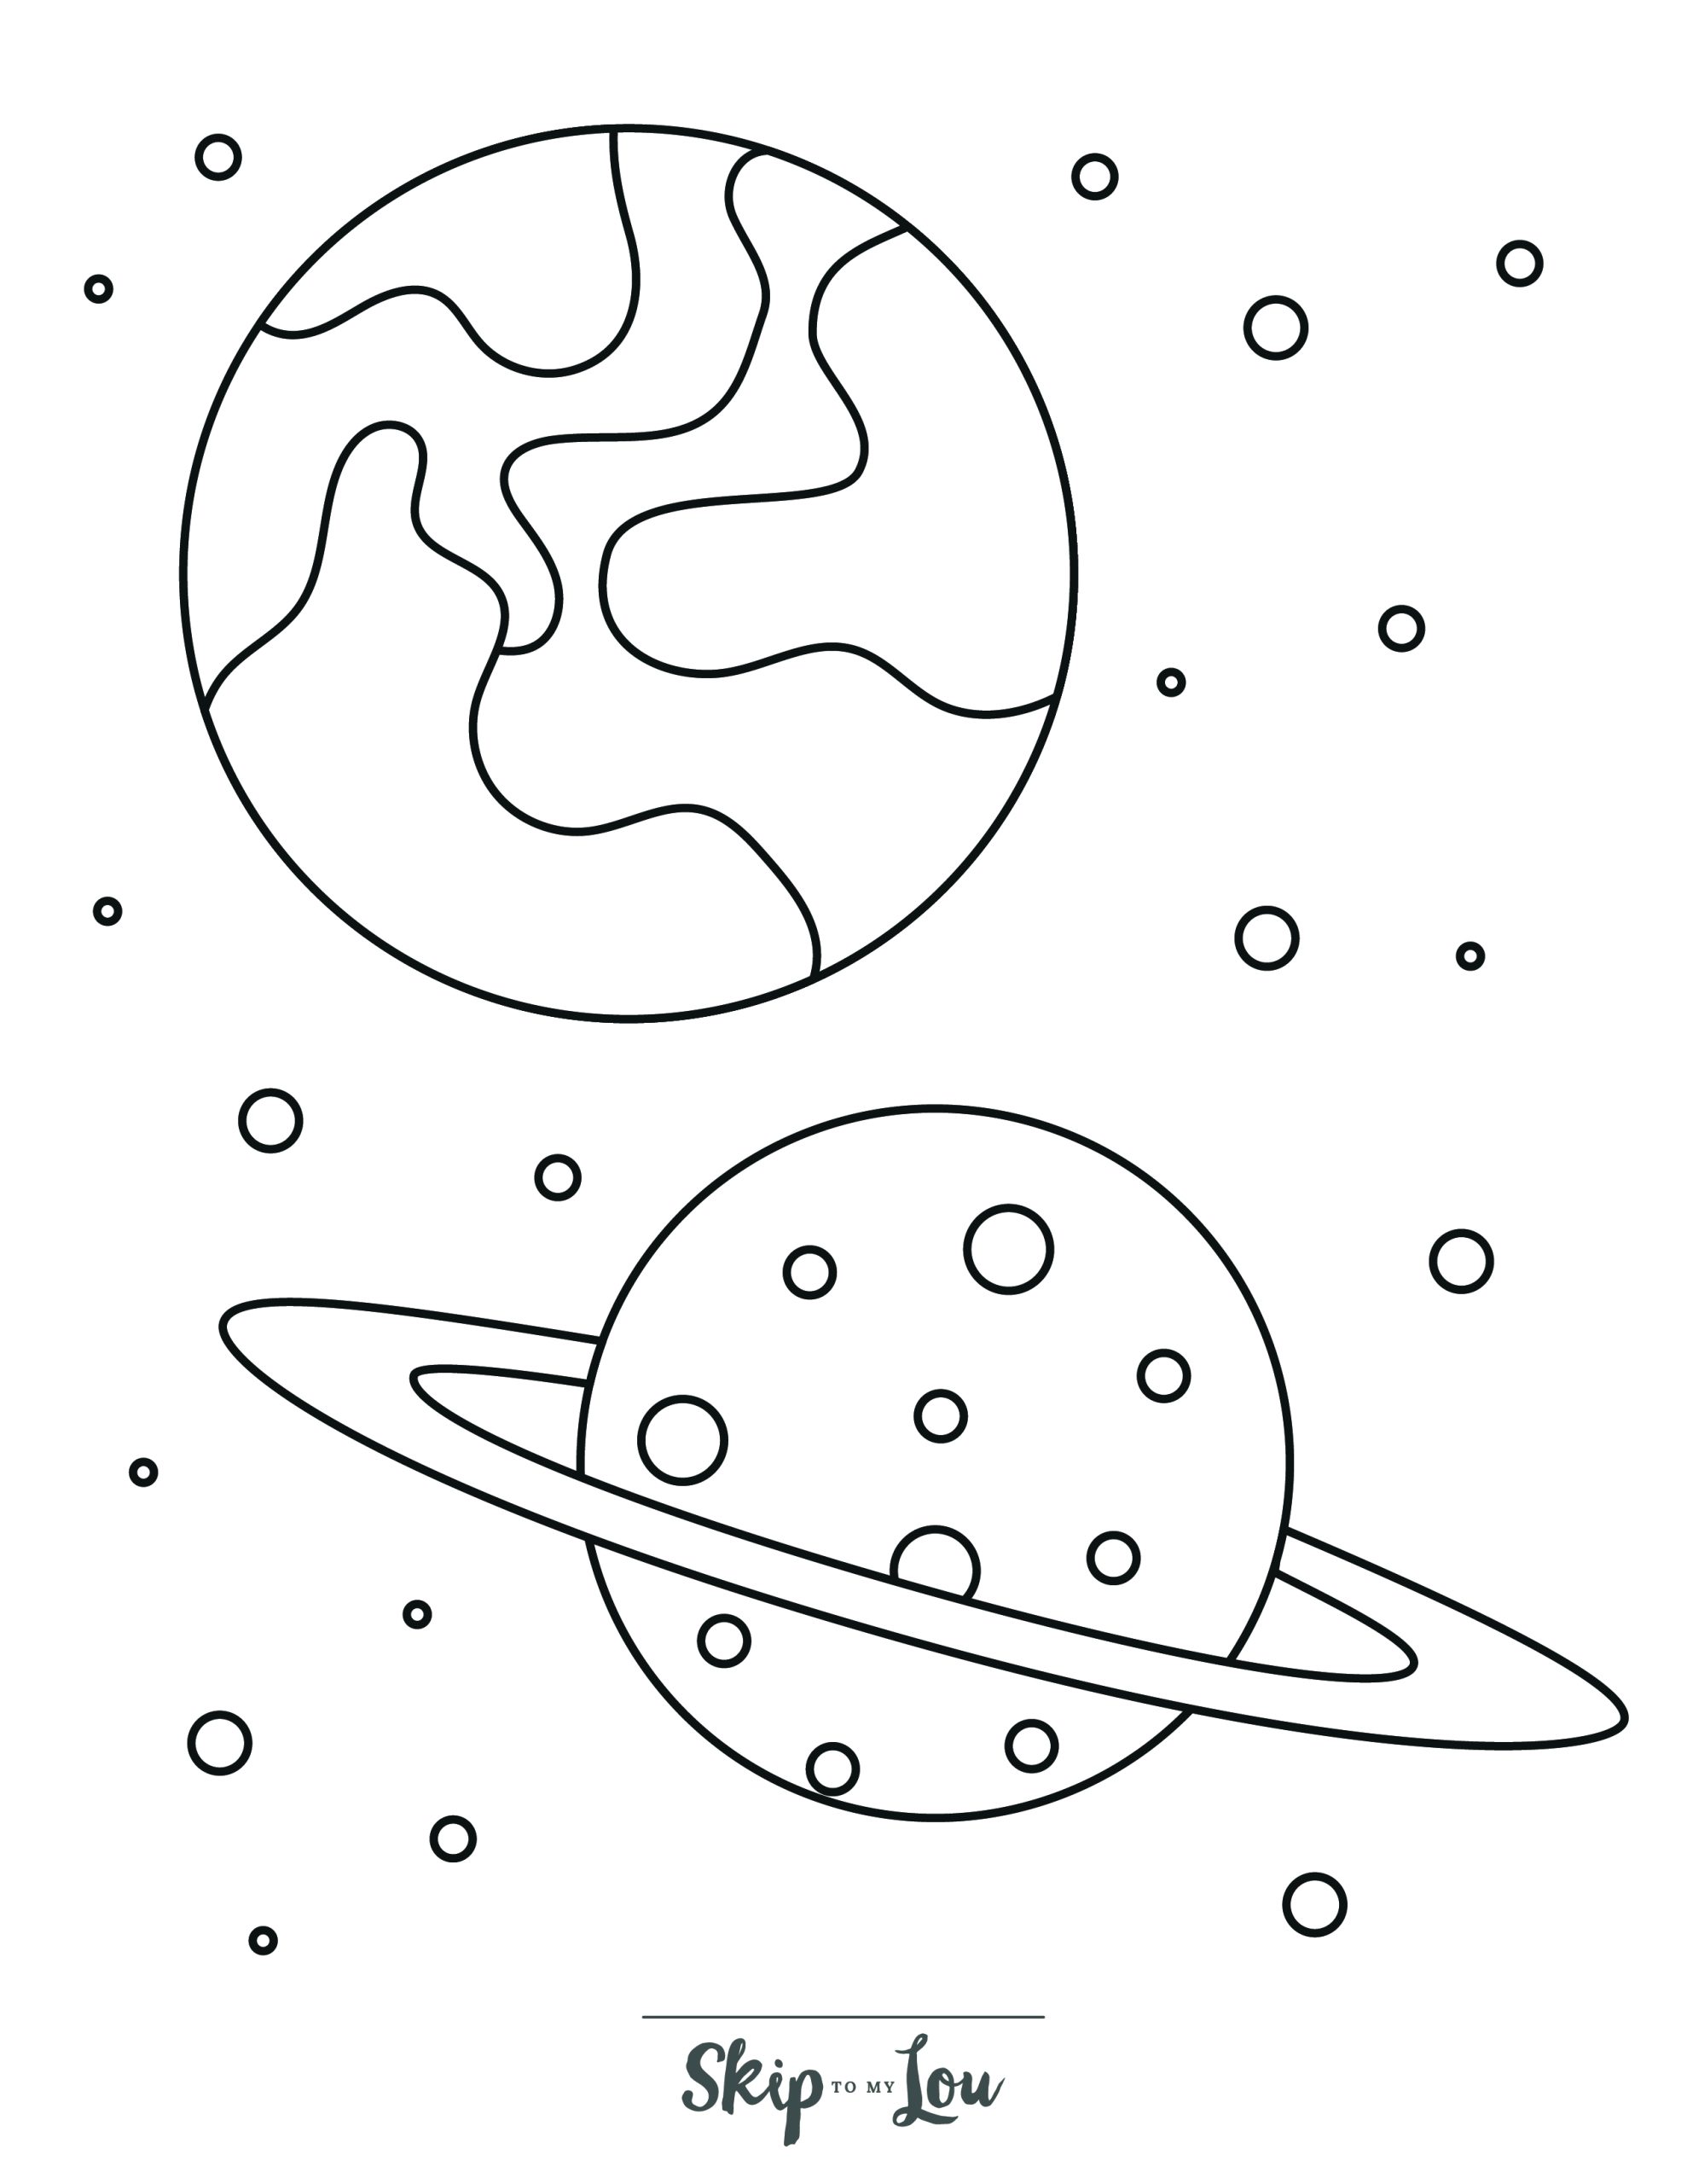 Space Coloring Page 5 - Planet Saturn with ring with other planet, stars in background